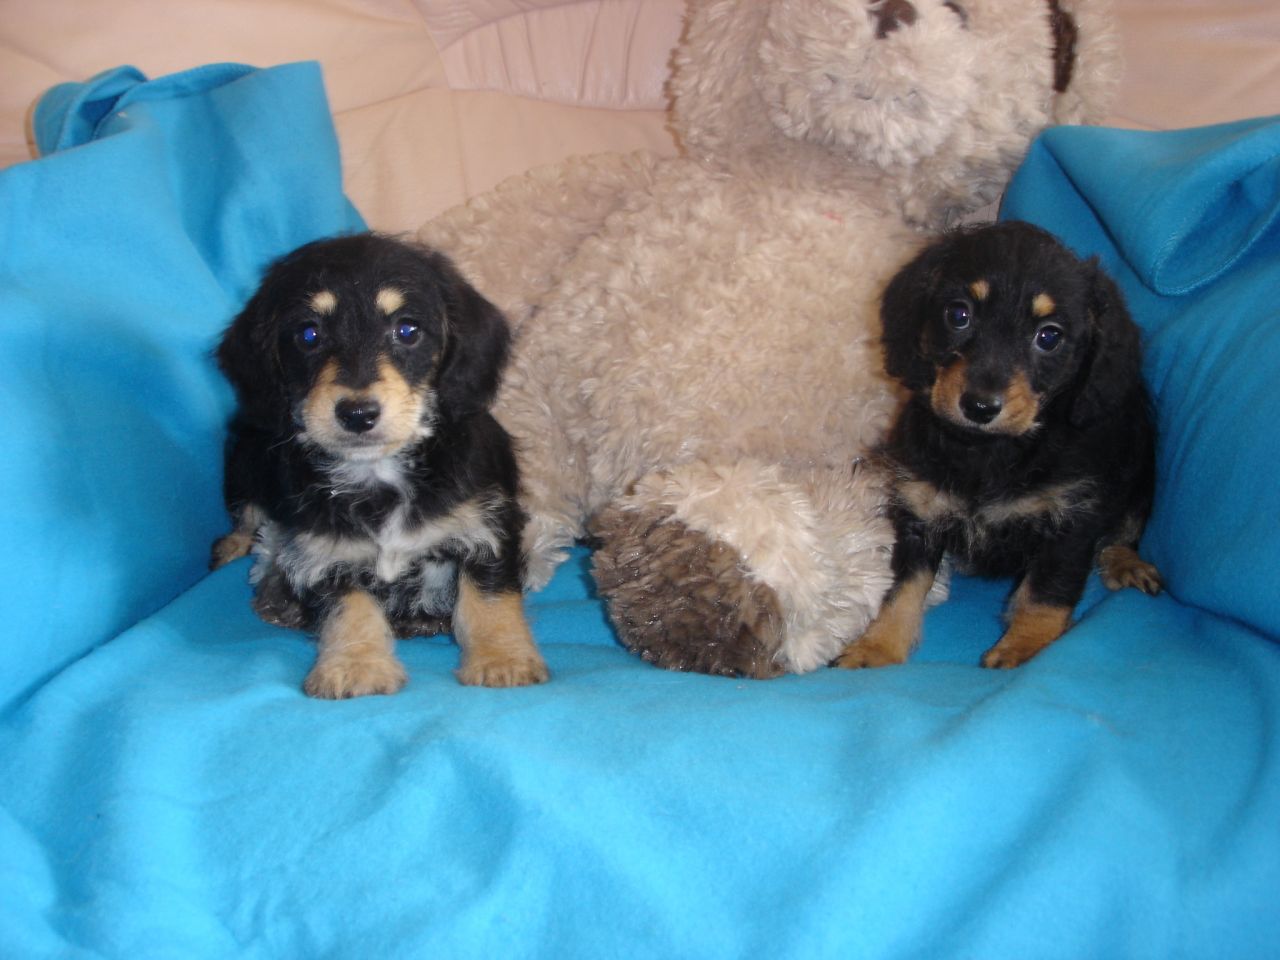 Dachshund and Poodle Mix How Does Doxiepoo Look Like